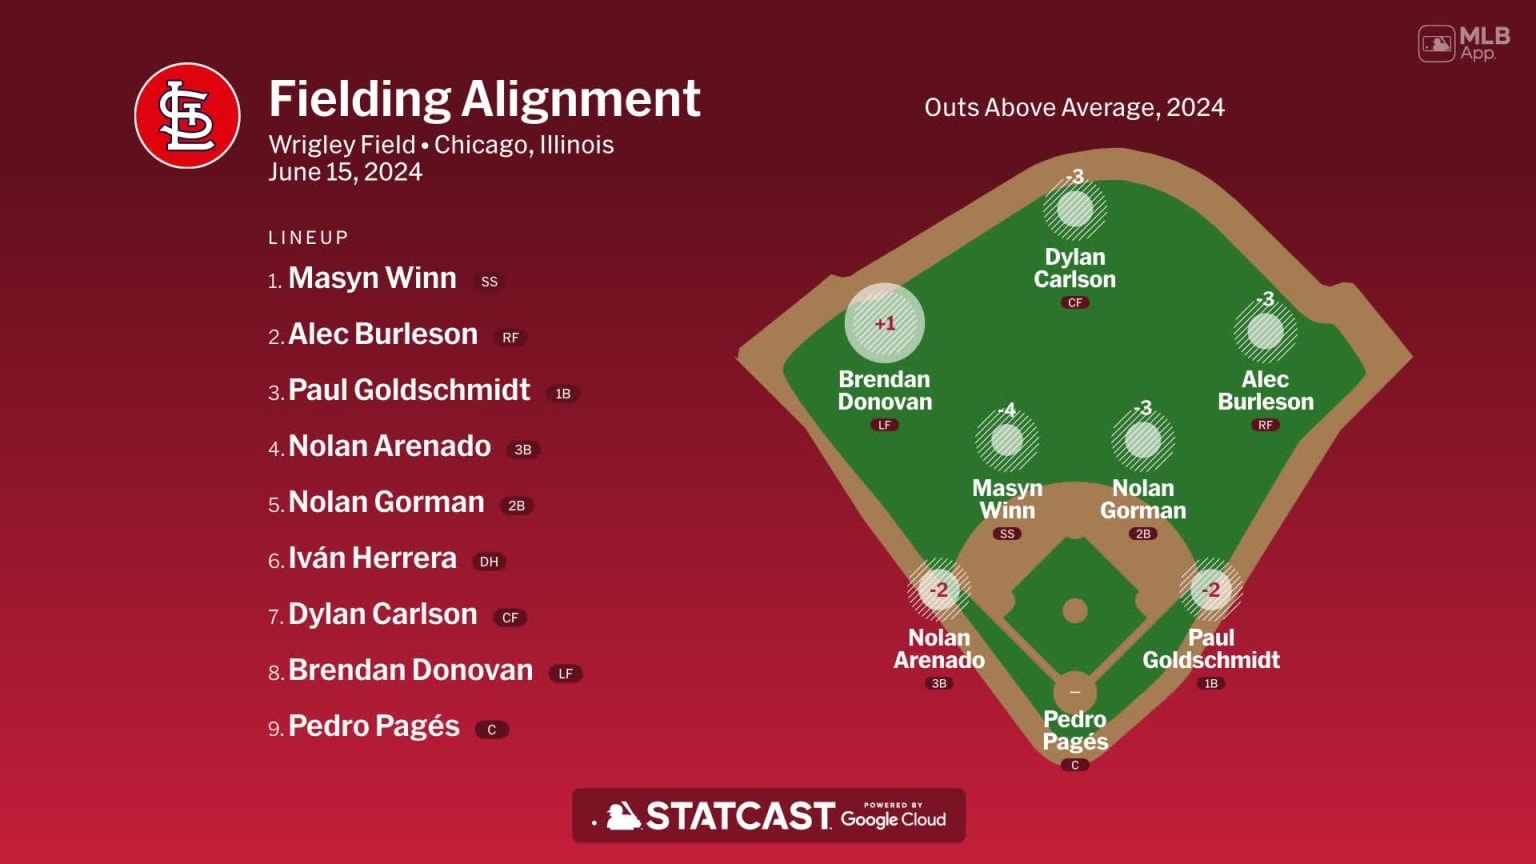 Fielding alignment for St. Louis